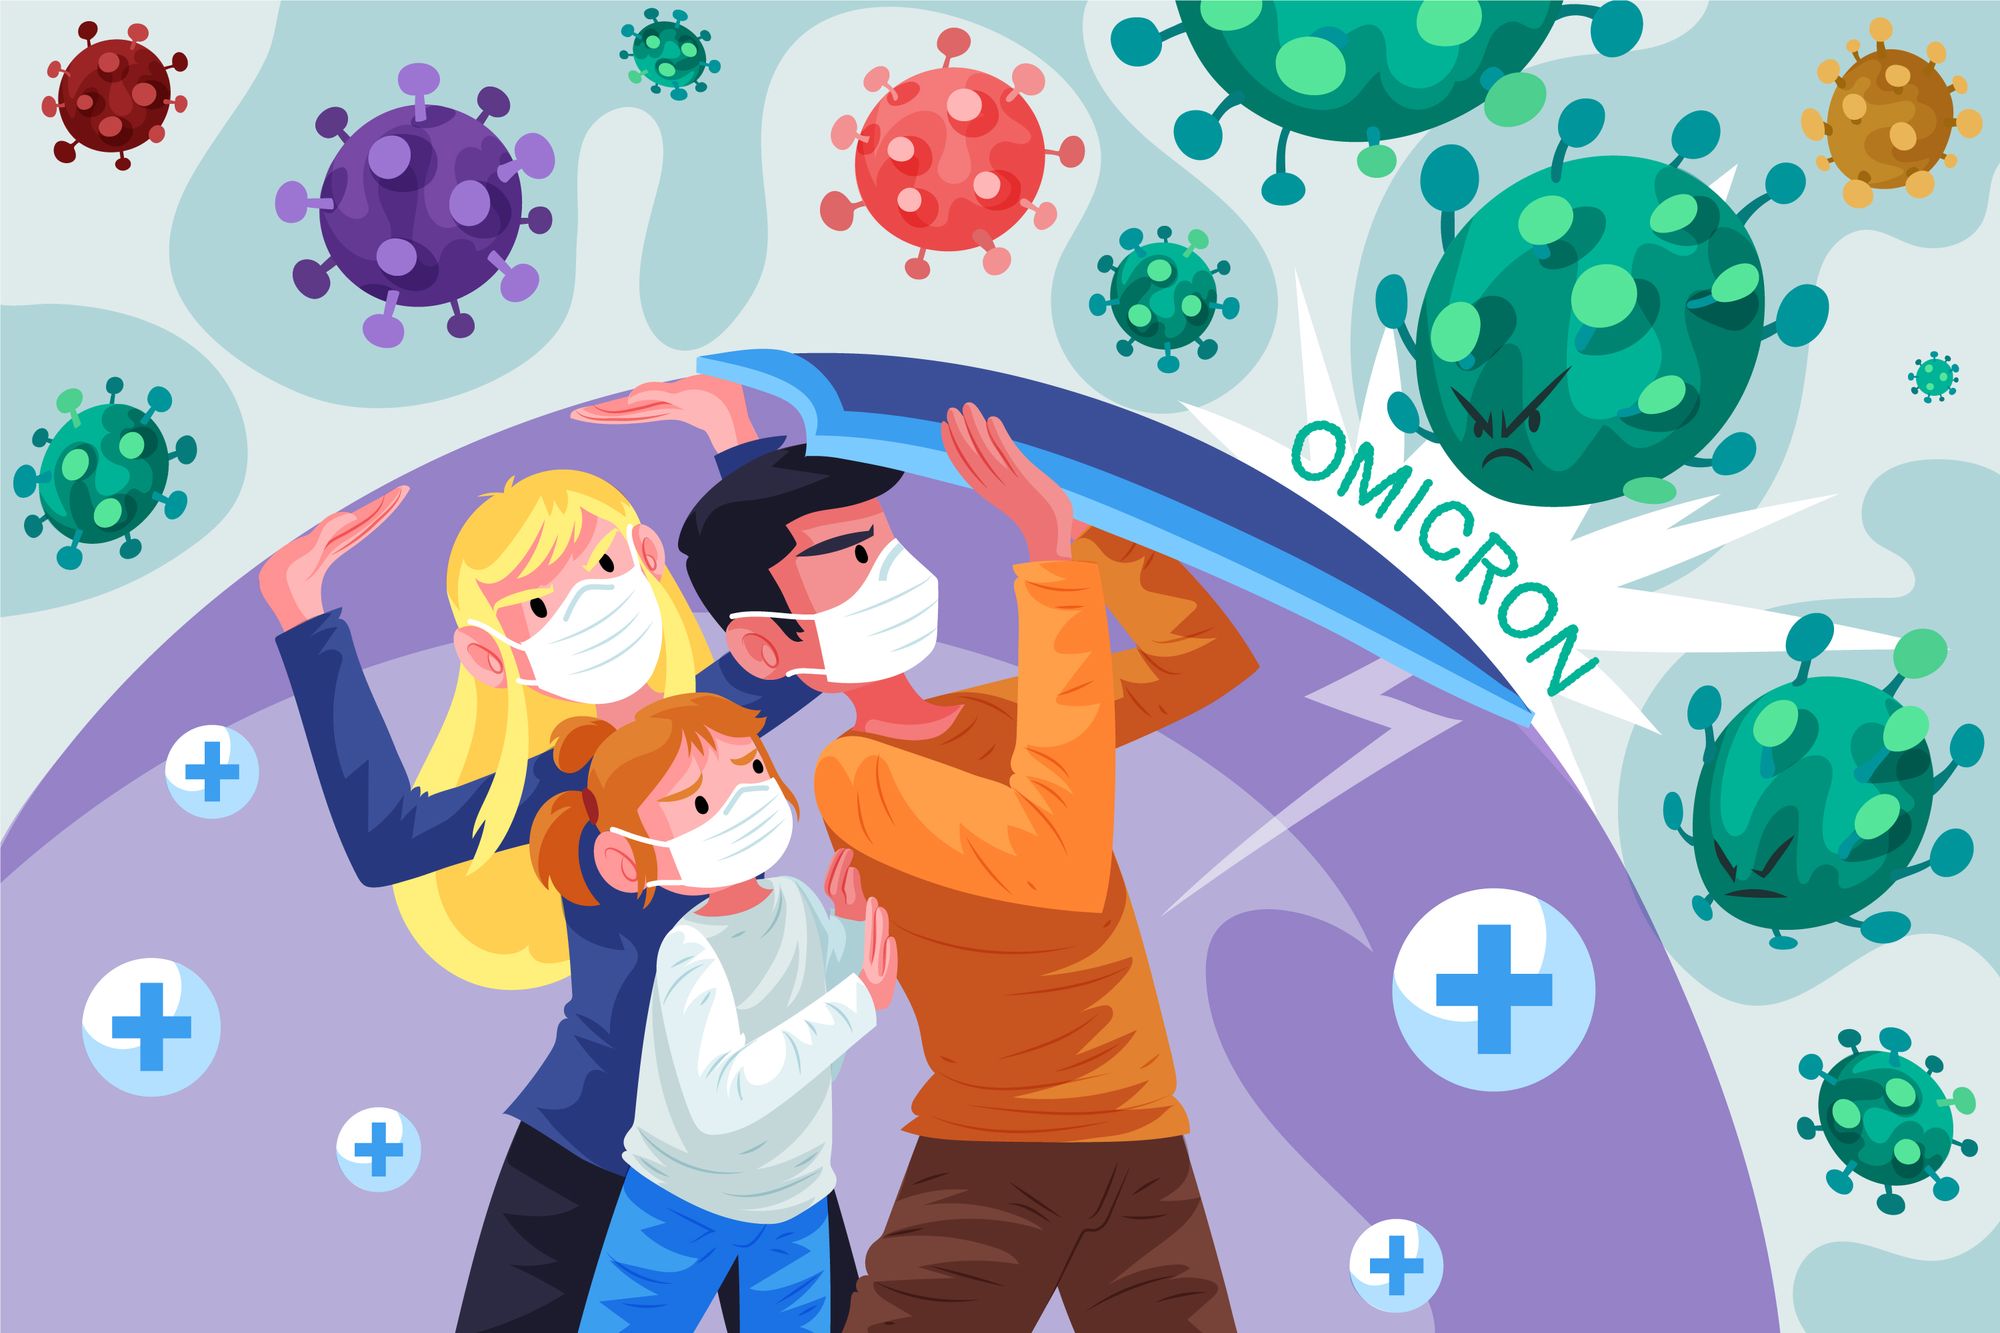 How is the Omicron virus affecting the education sector?